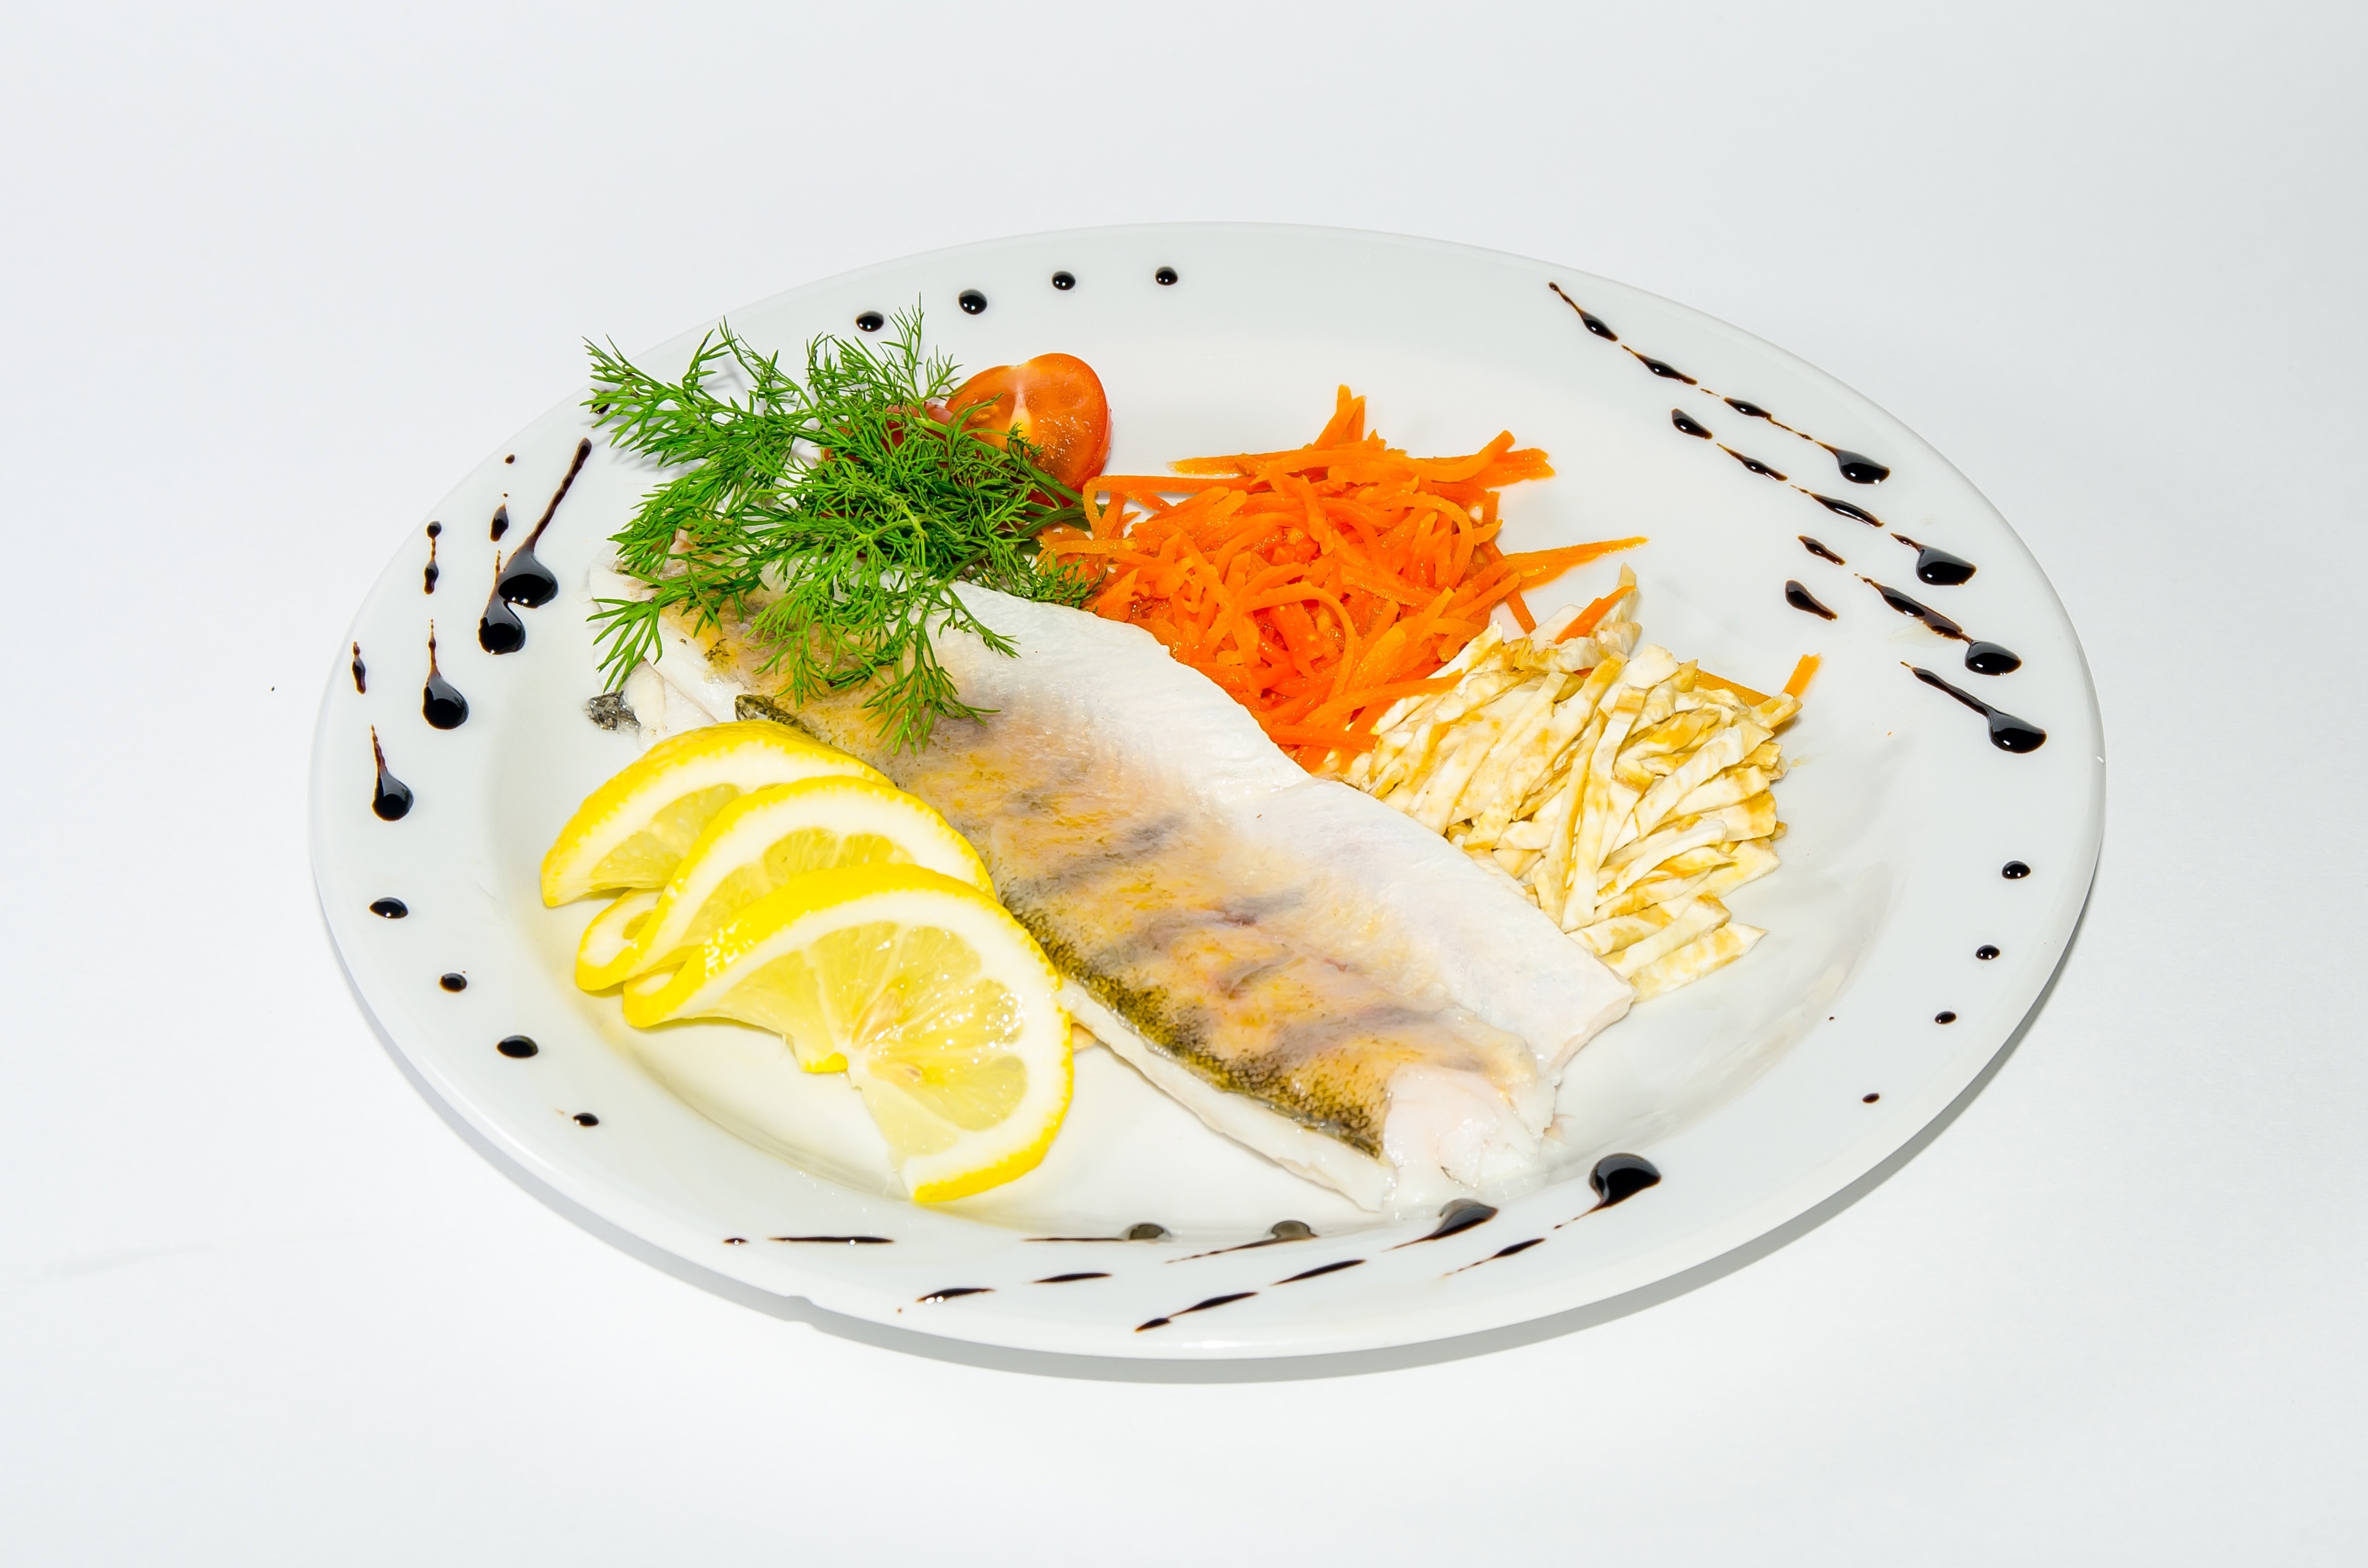 squid, carrots, and lemon with celery dish